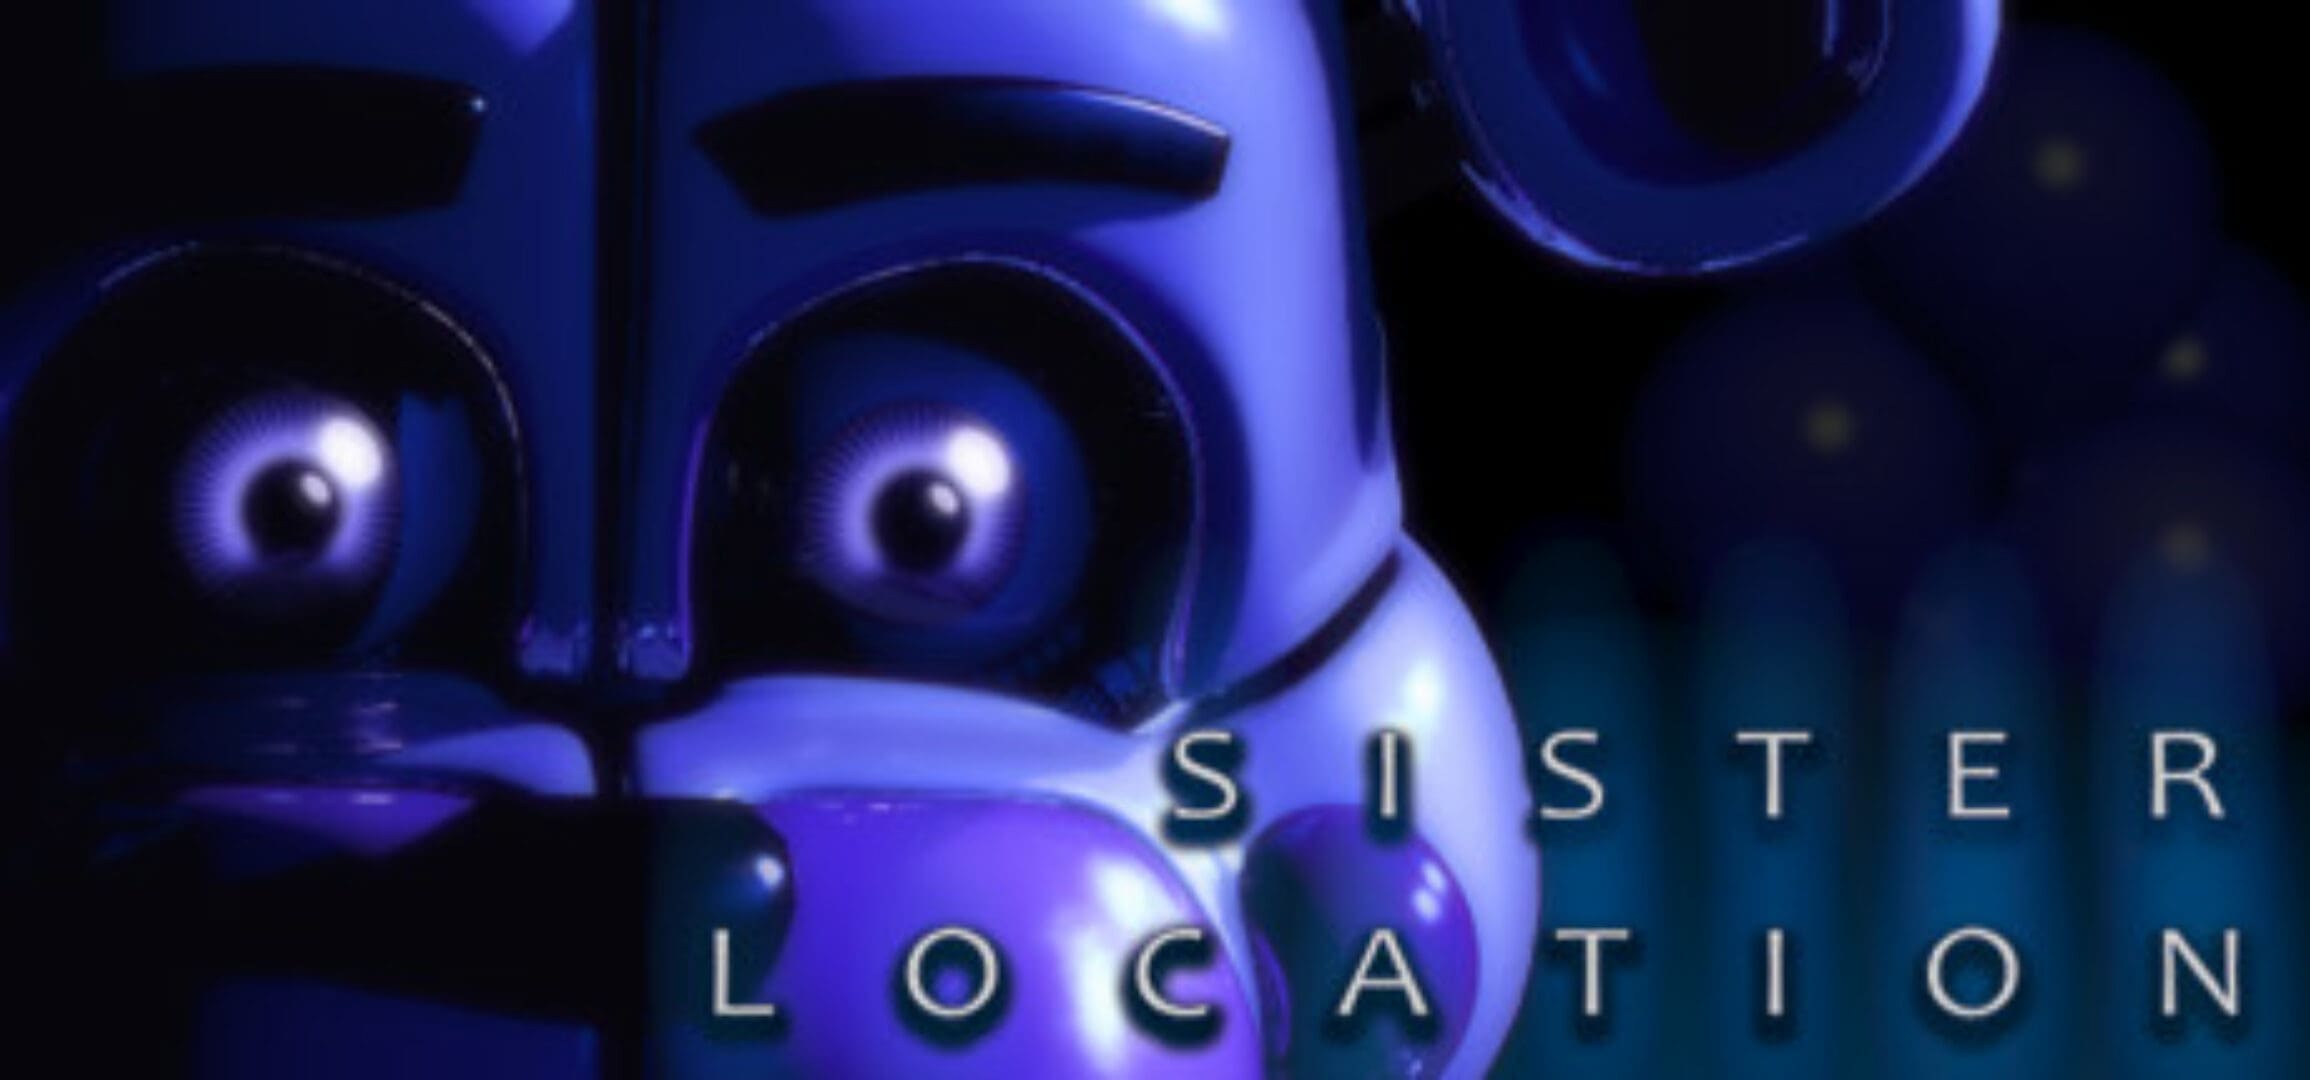 Five Nights at Freddy's Sister Location Trailer Released - Marooners' Rock